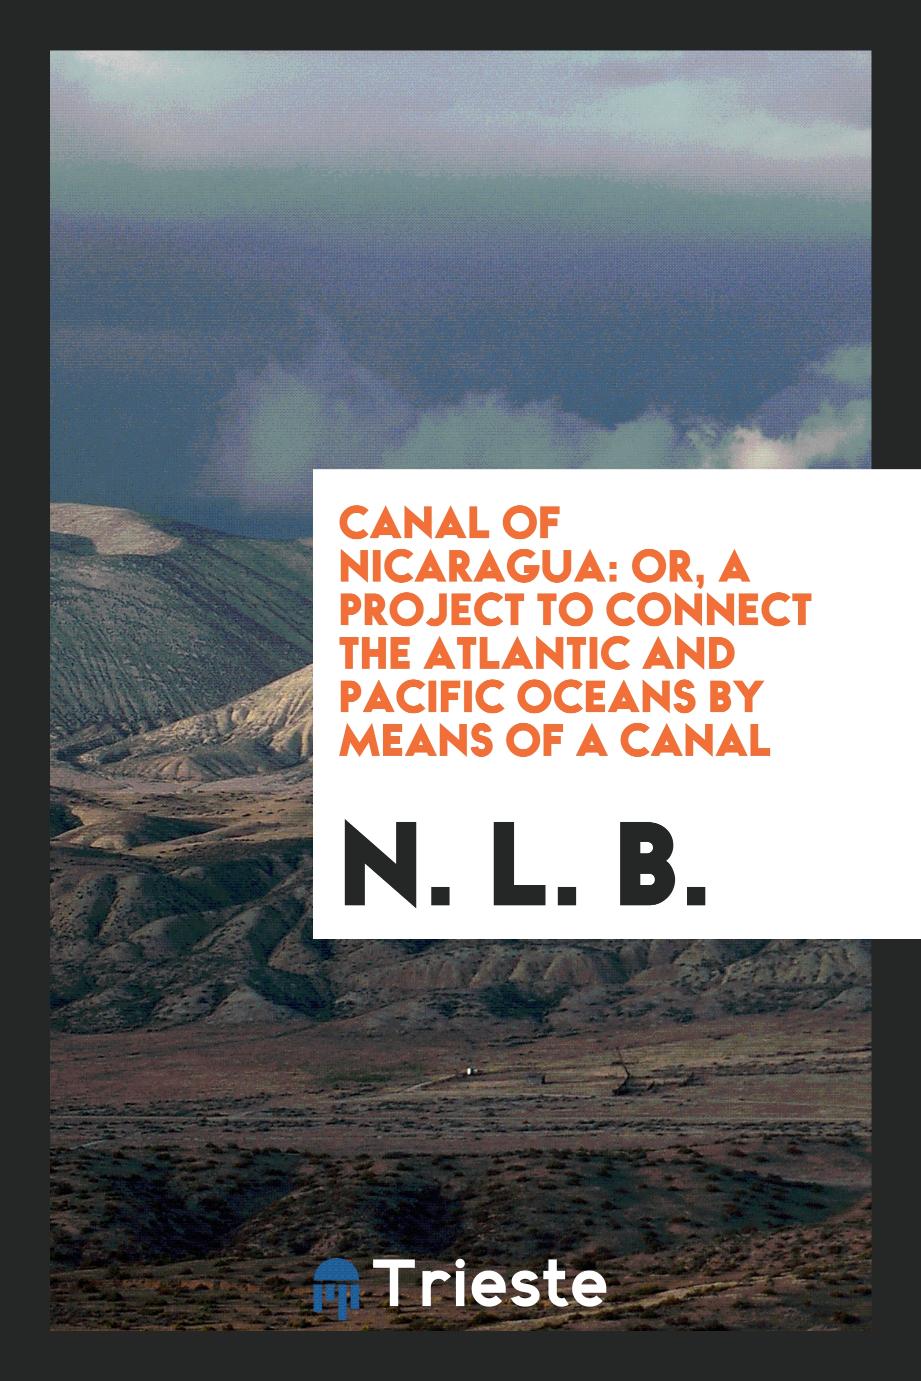 Canal of Nicaragua: Or, a Project to Connect the Atlantic and Pacific Oceans by Means of a Canal